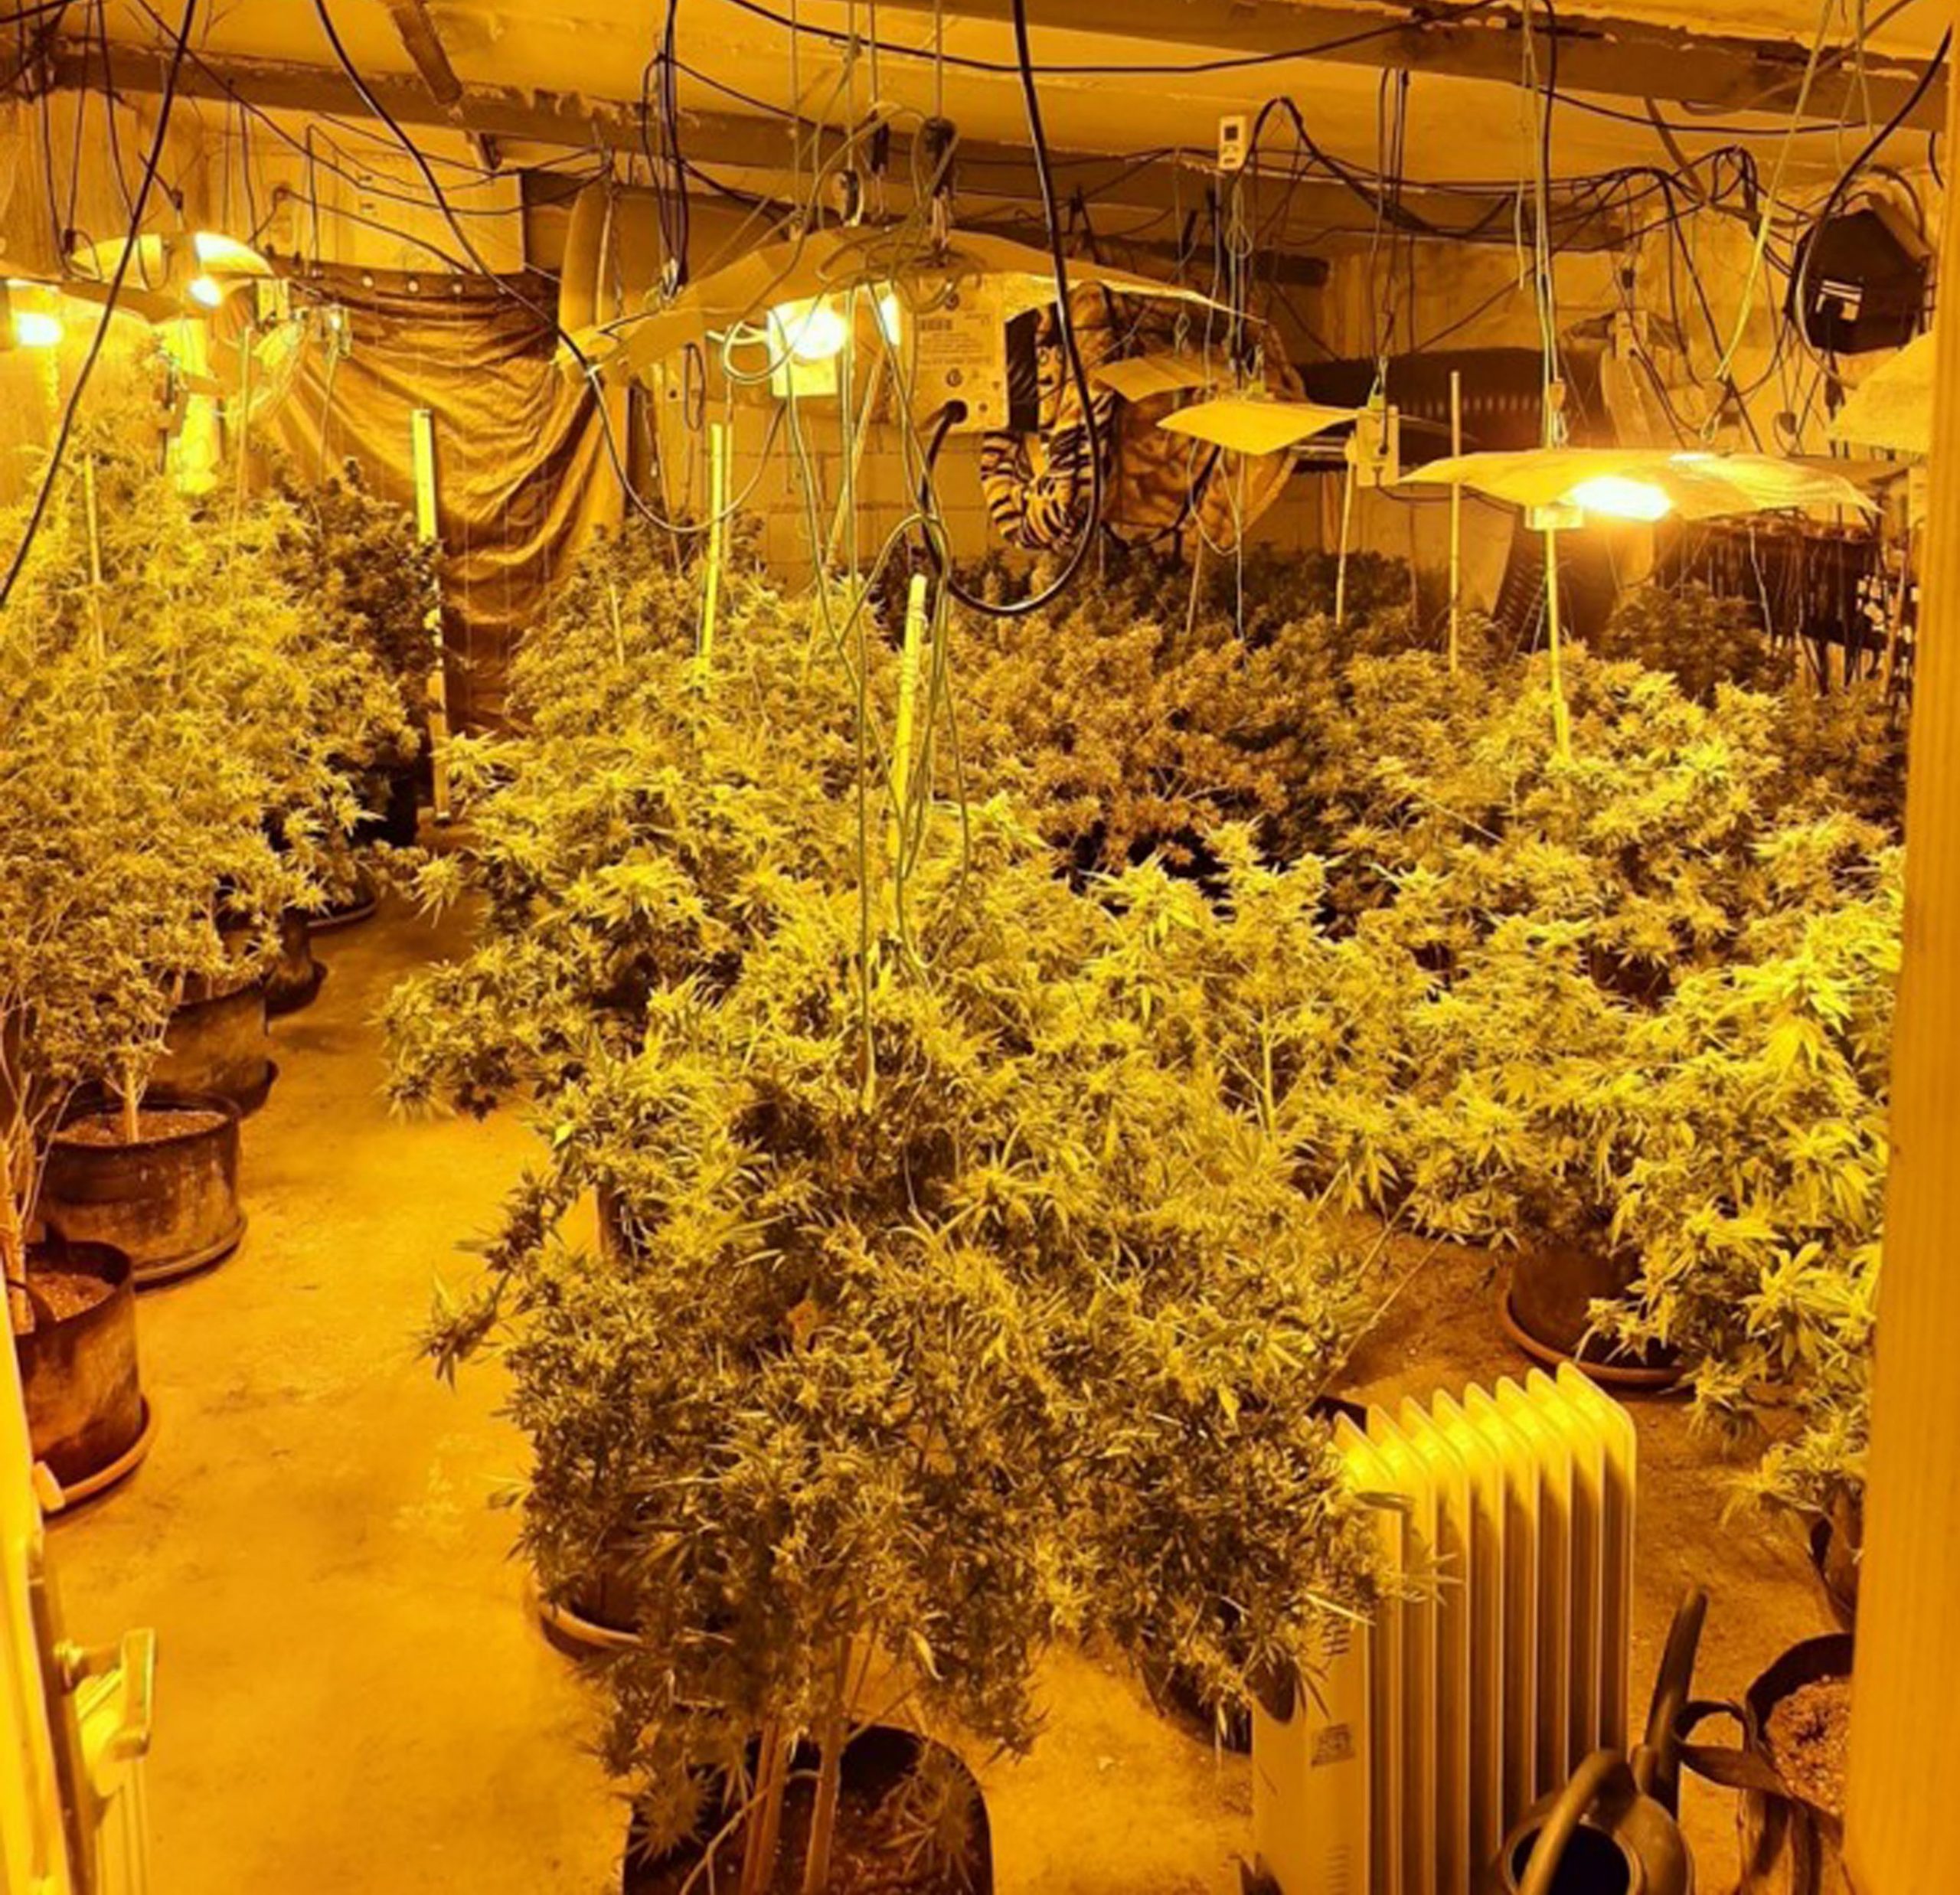 Police raided over 1k cannabis farms, seized plants worth £130million and arrested 1k suspects in month-long crackdown